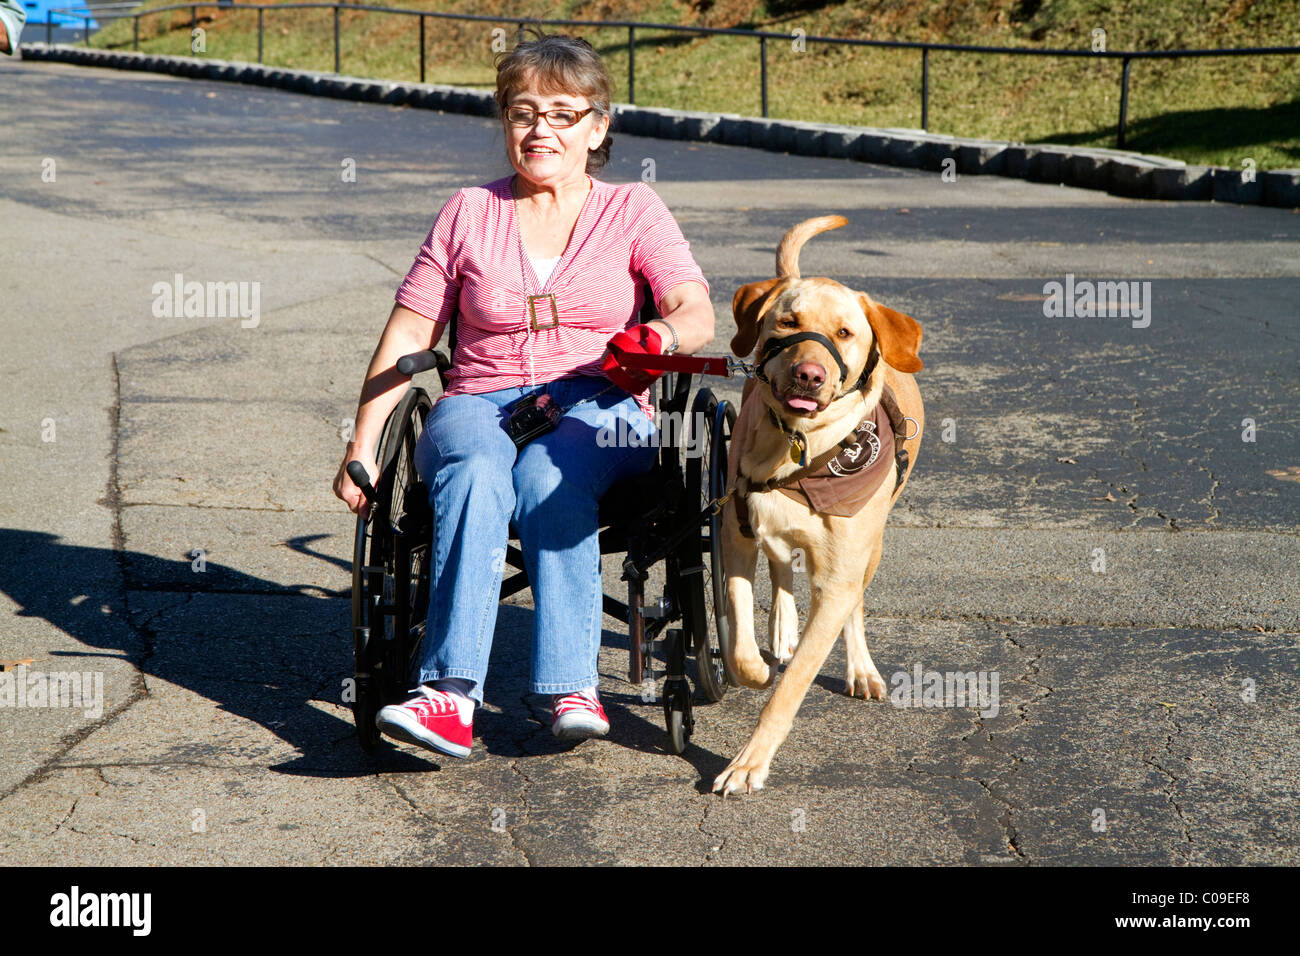 Disabled woman in a wheelchair using a service dog for help. Stock Photo